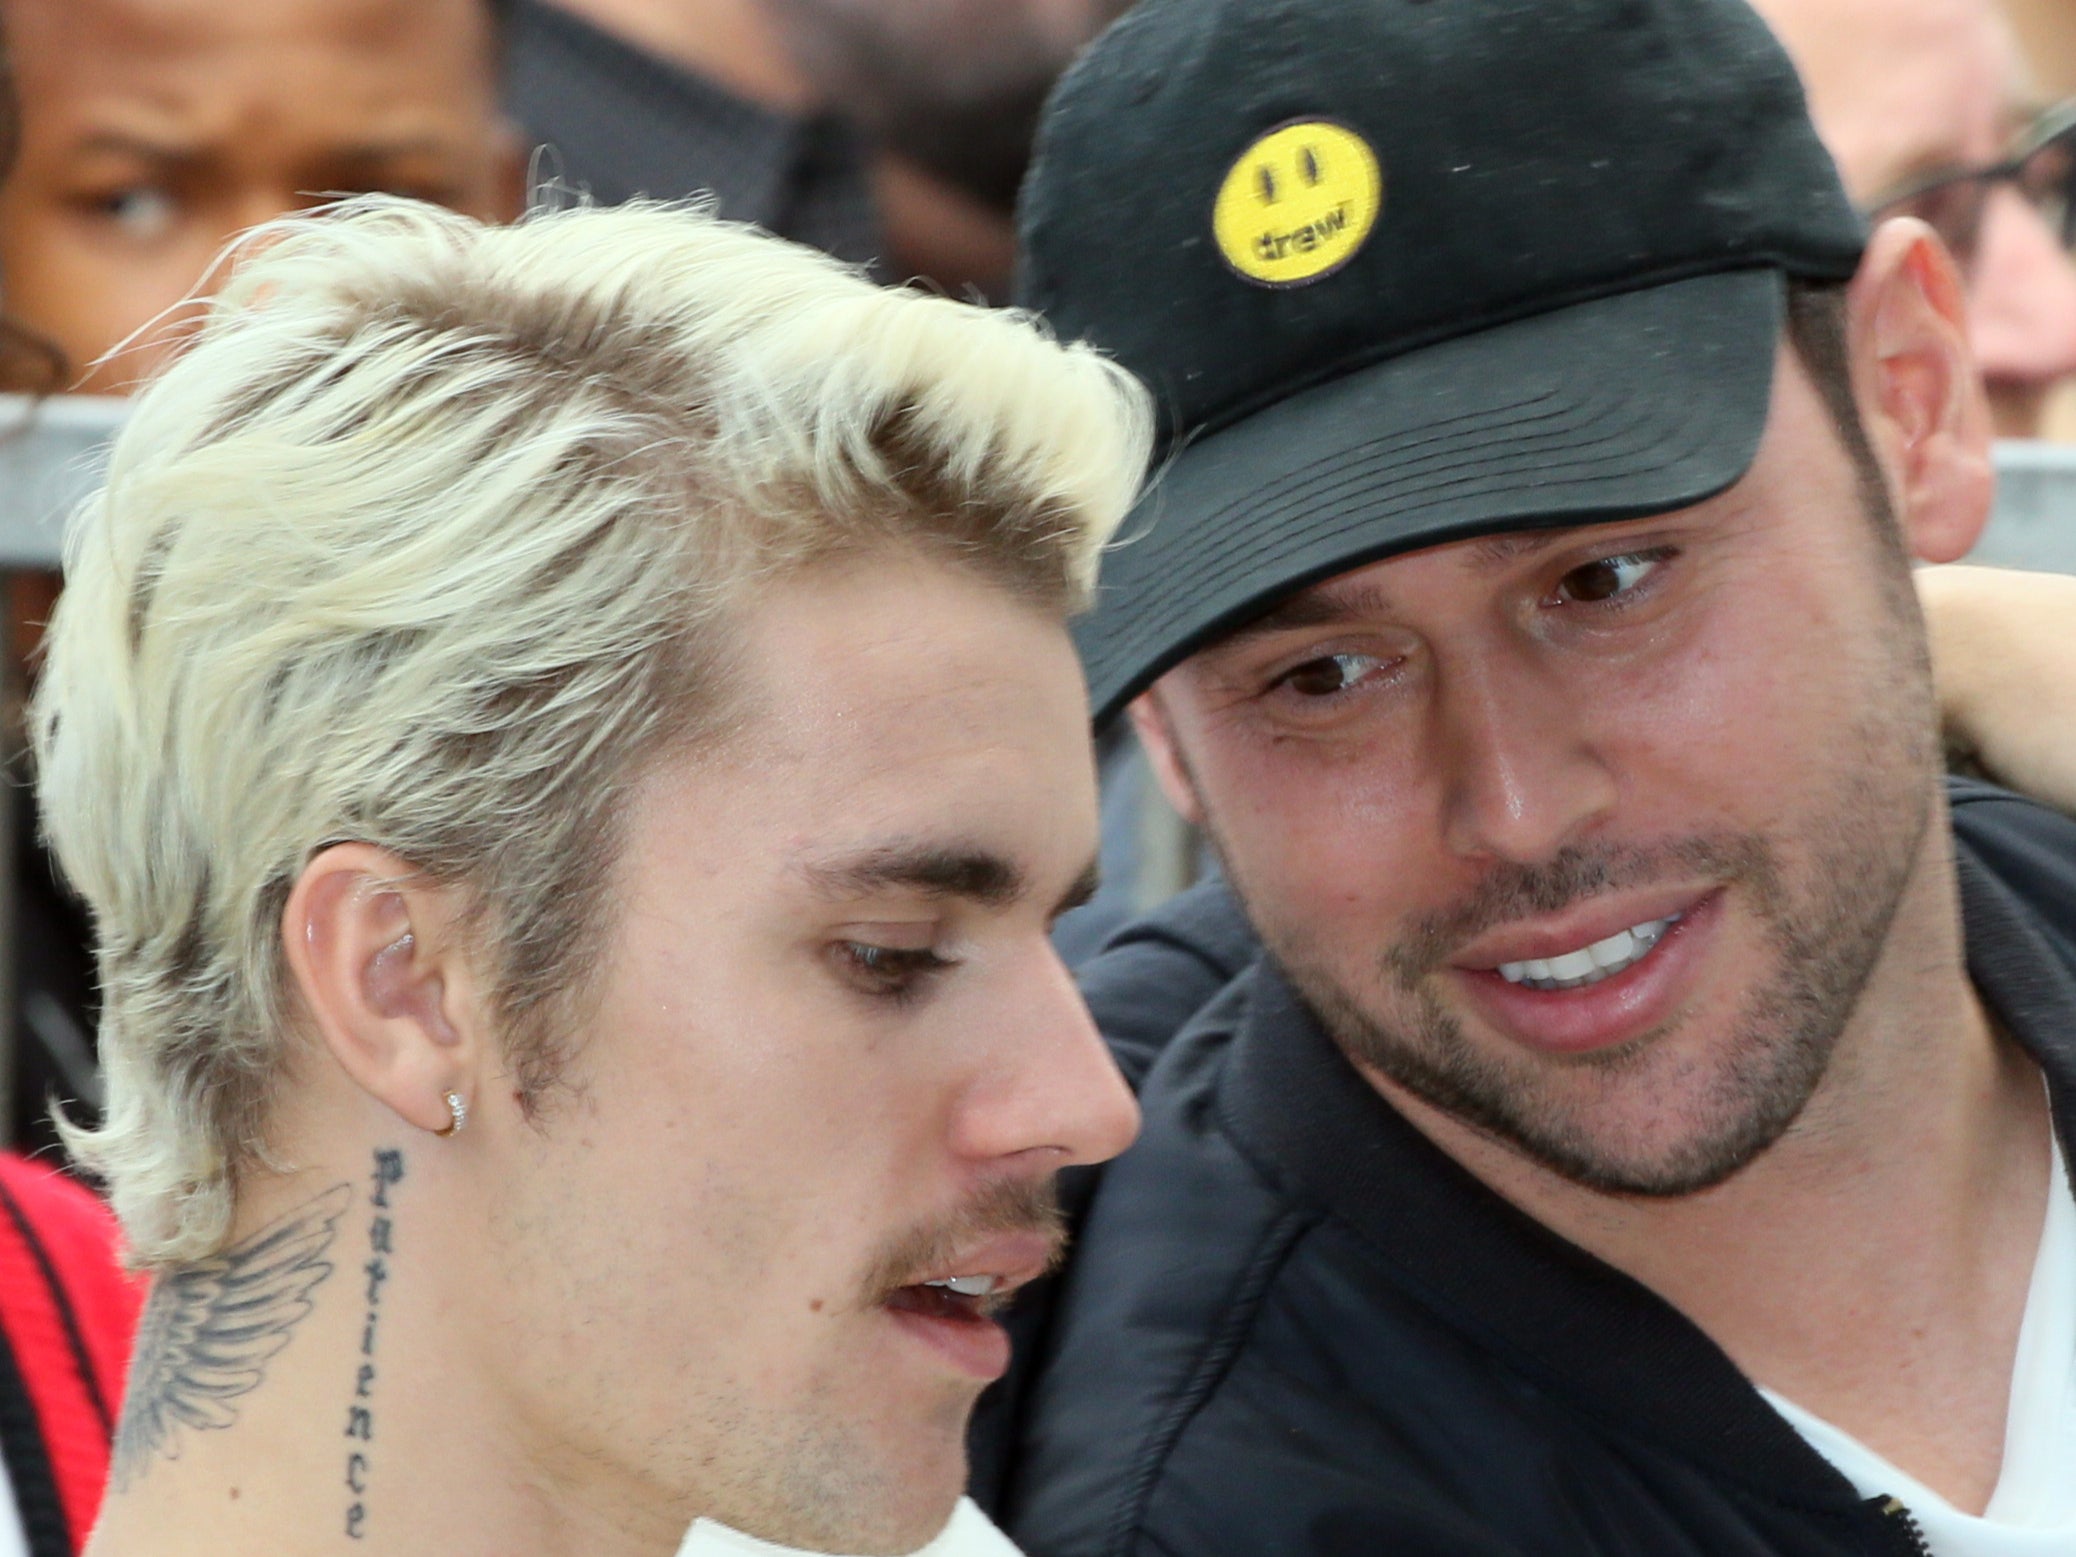 Justin Bieber (left) and Scooter Braun in 2020